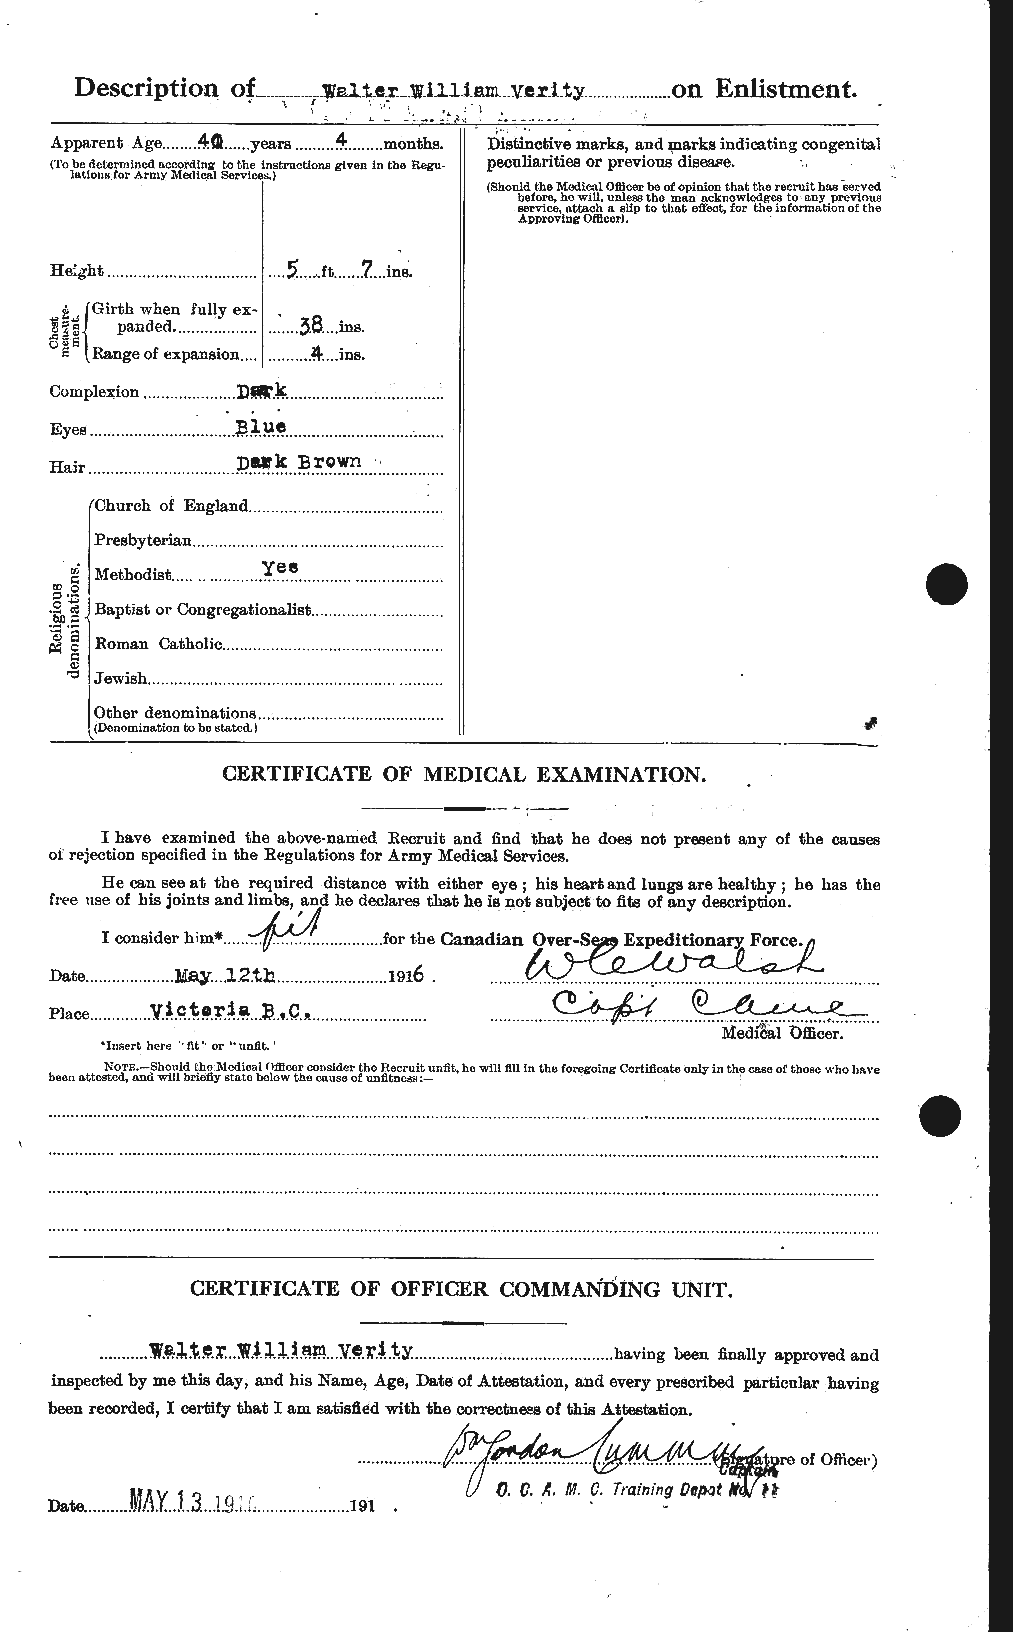 Personnel Records of the First World War - CEF 649515b